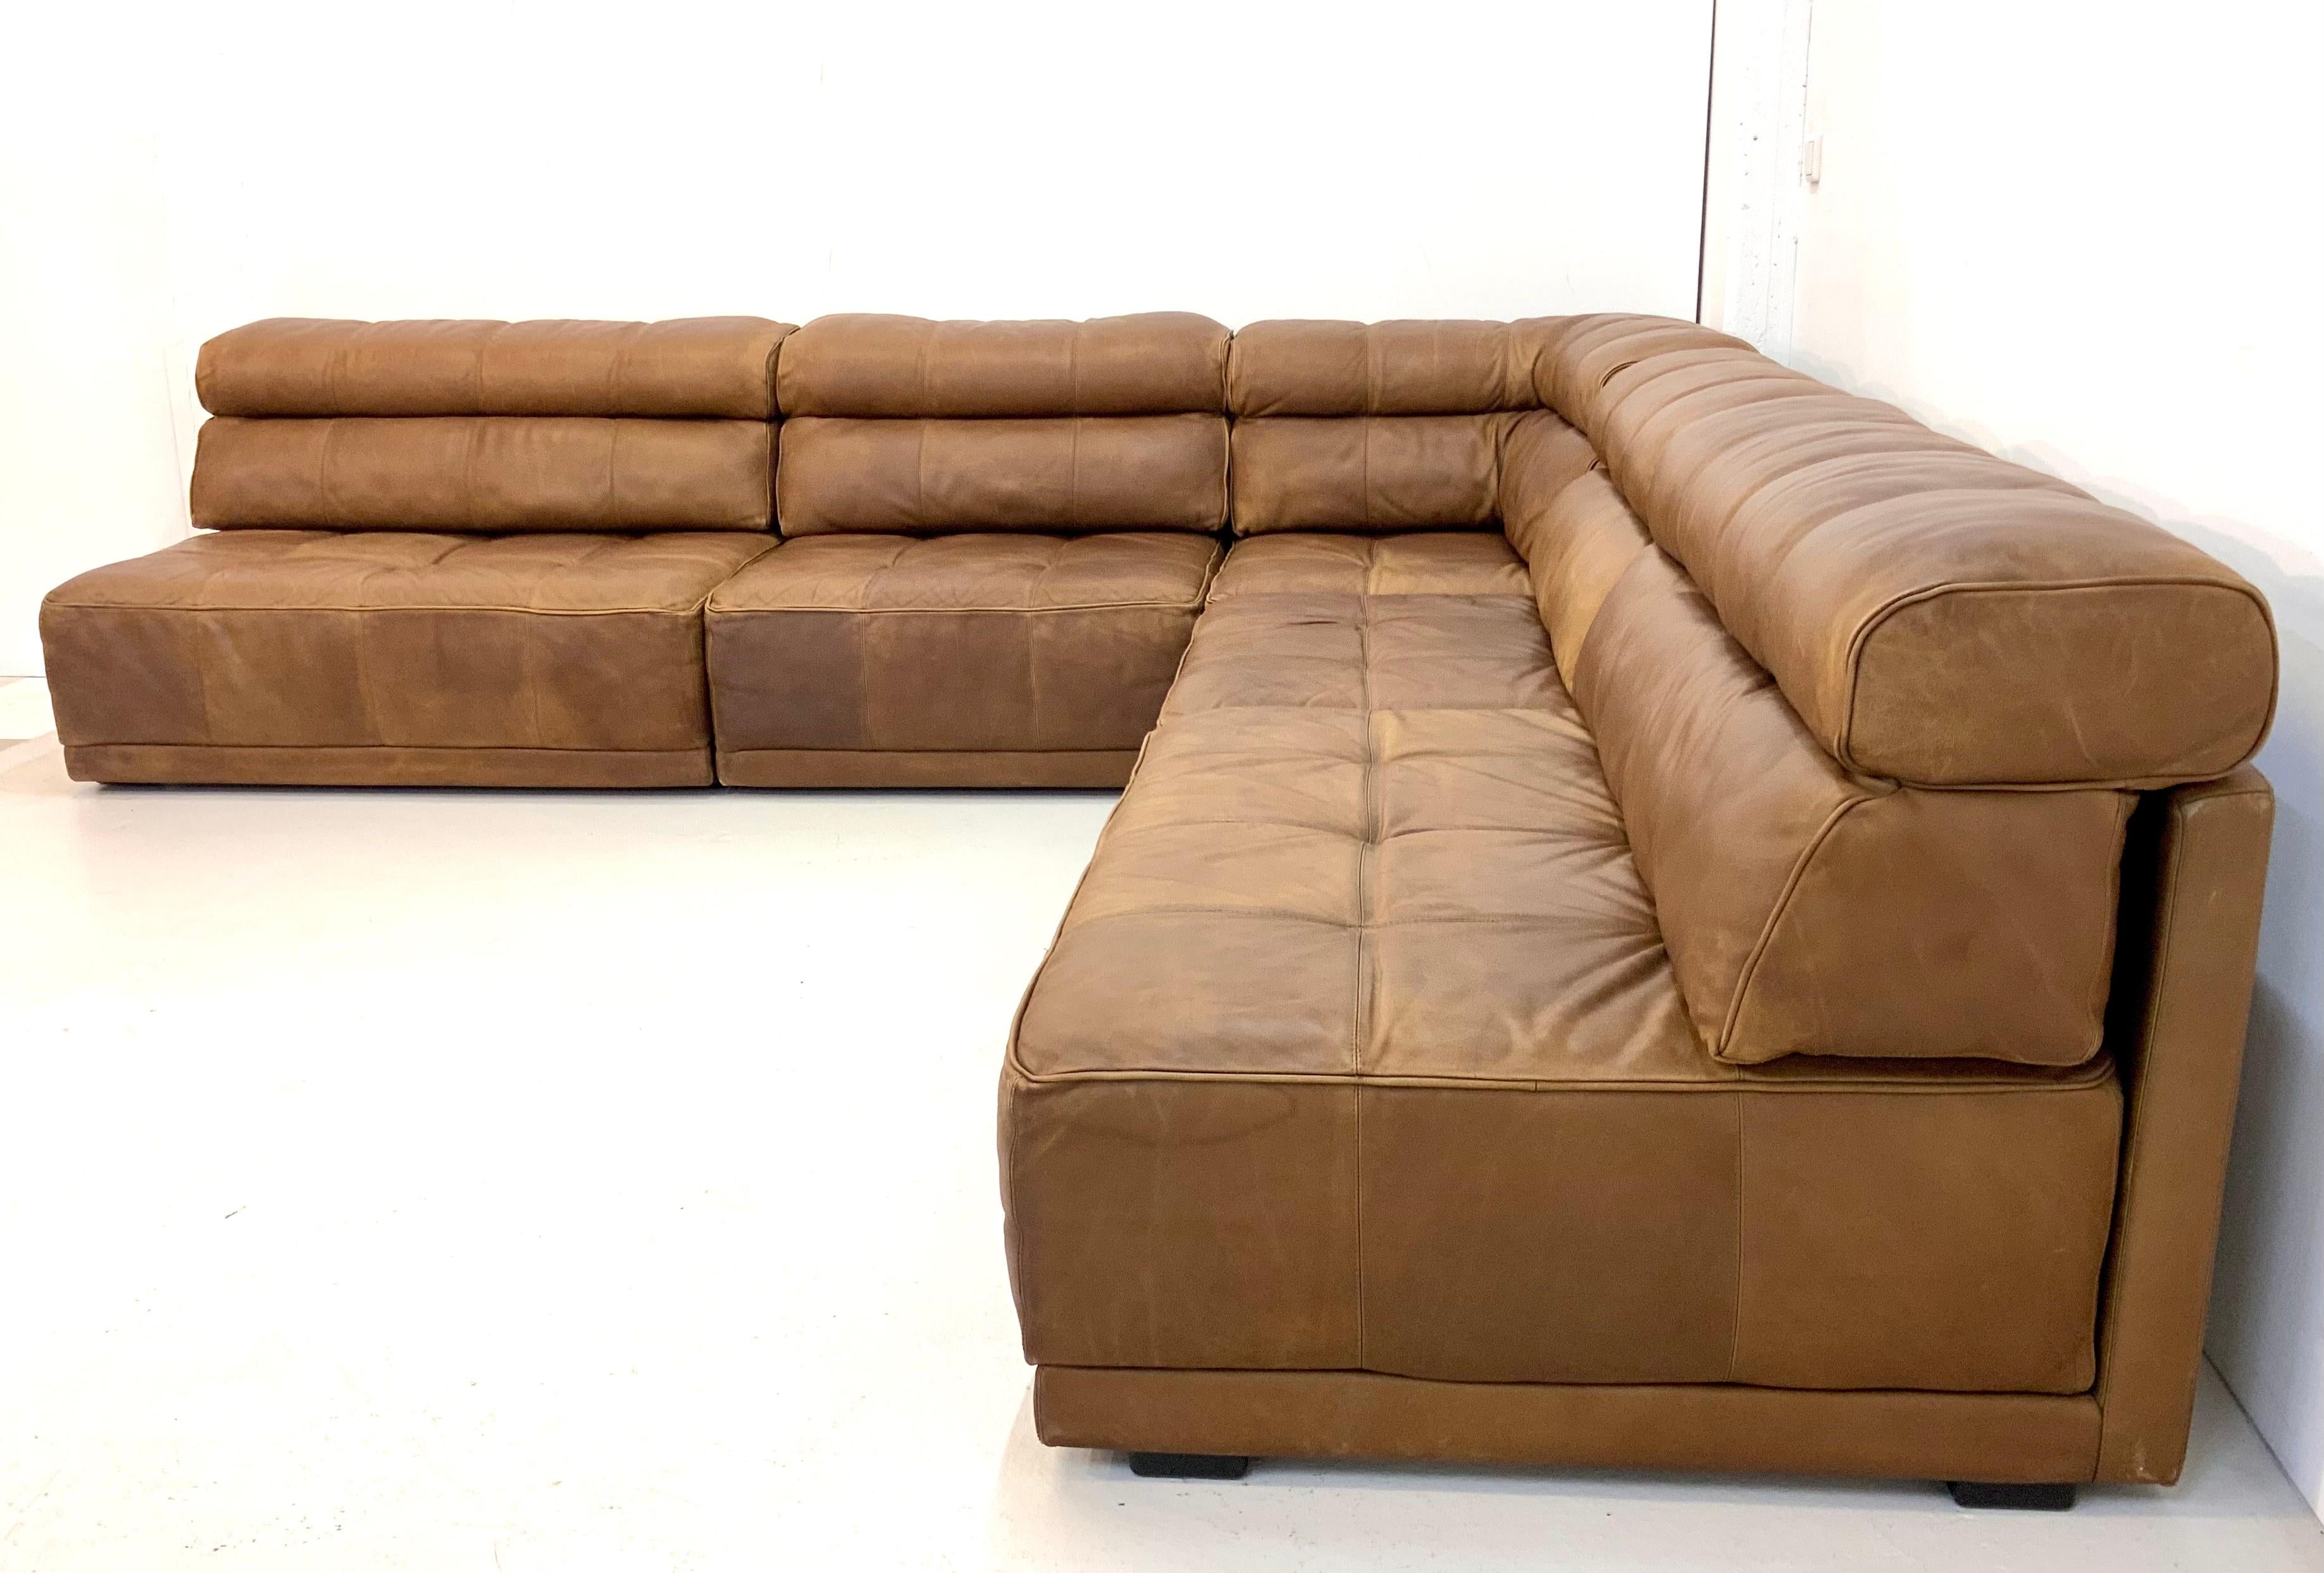 This extremely rare xxl sectional patchwork leather lounge landscape is from the worldwide renowned leather manufacturer and luxury Germany brand Cor. This Cor model is very similar to the Trio model from COR / Design by Team Form (Switzerland), it